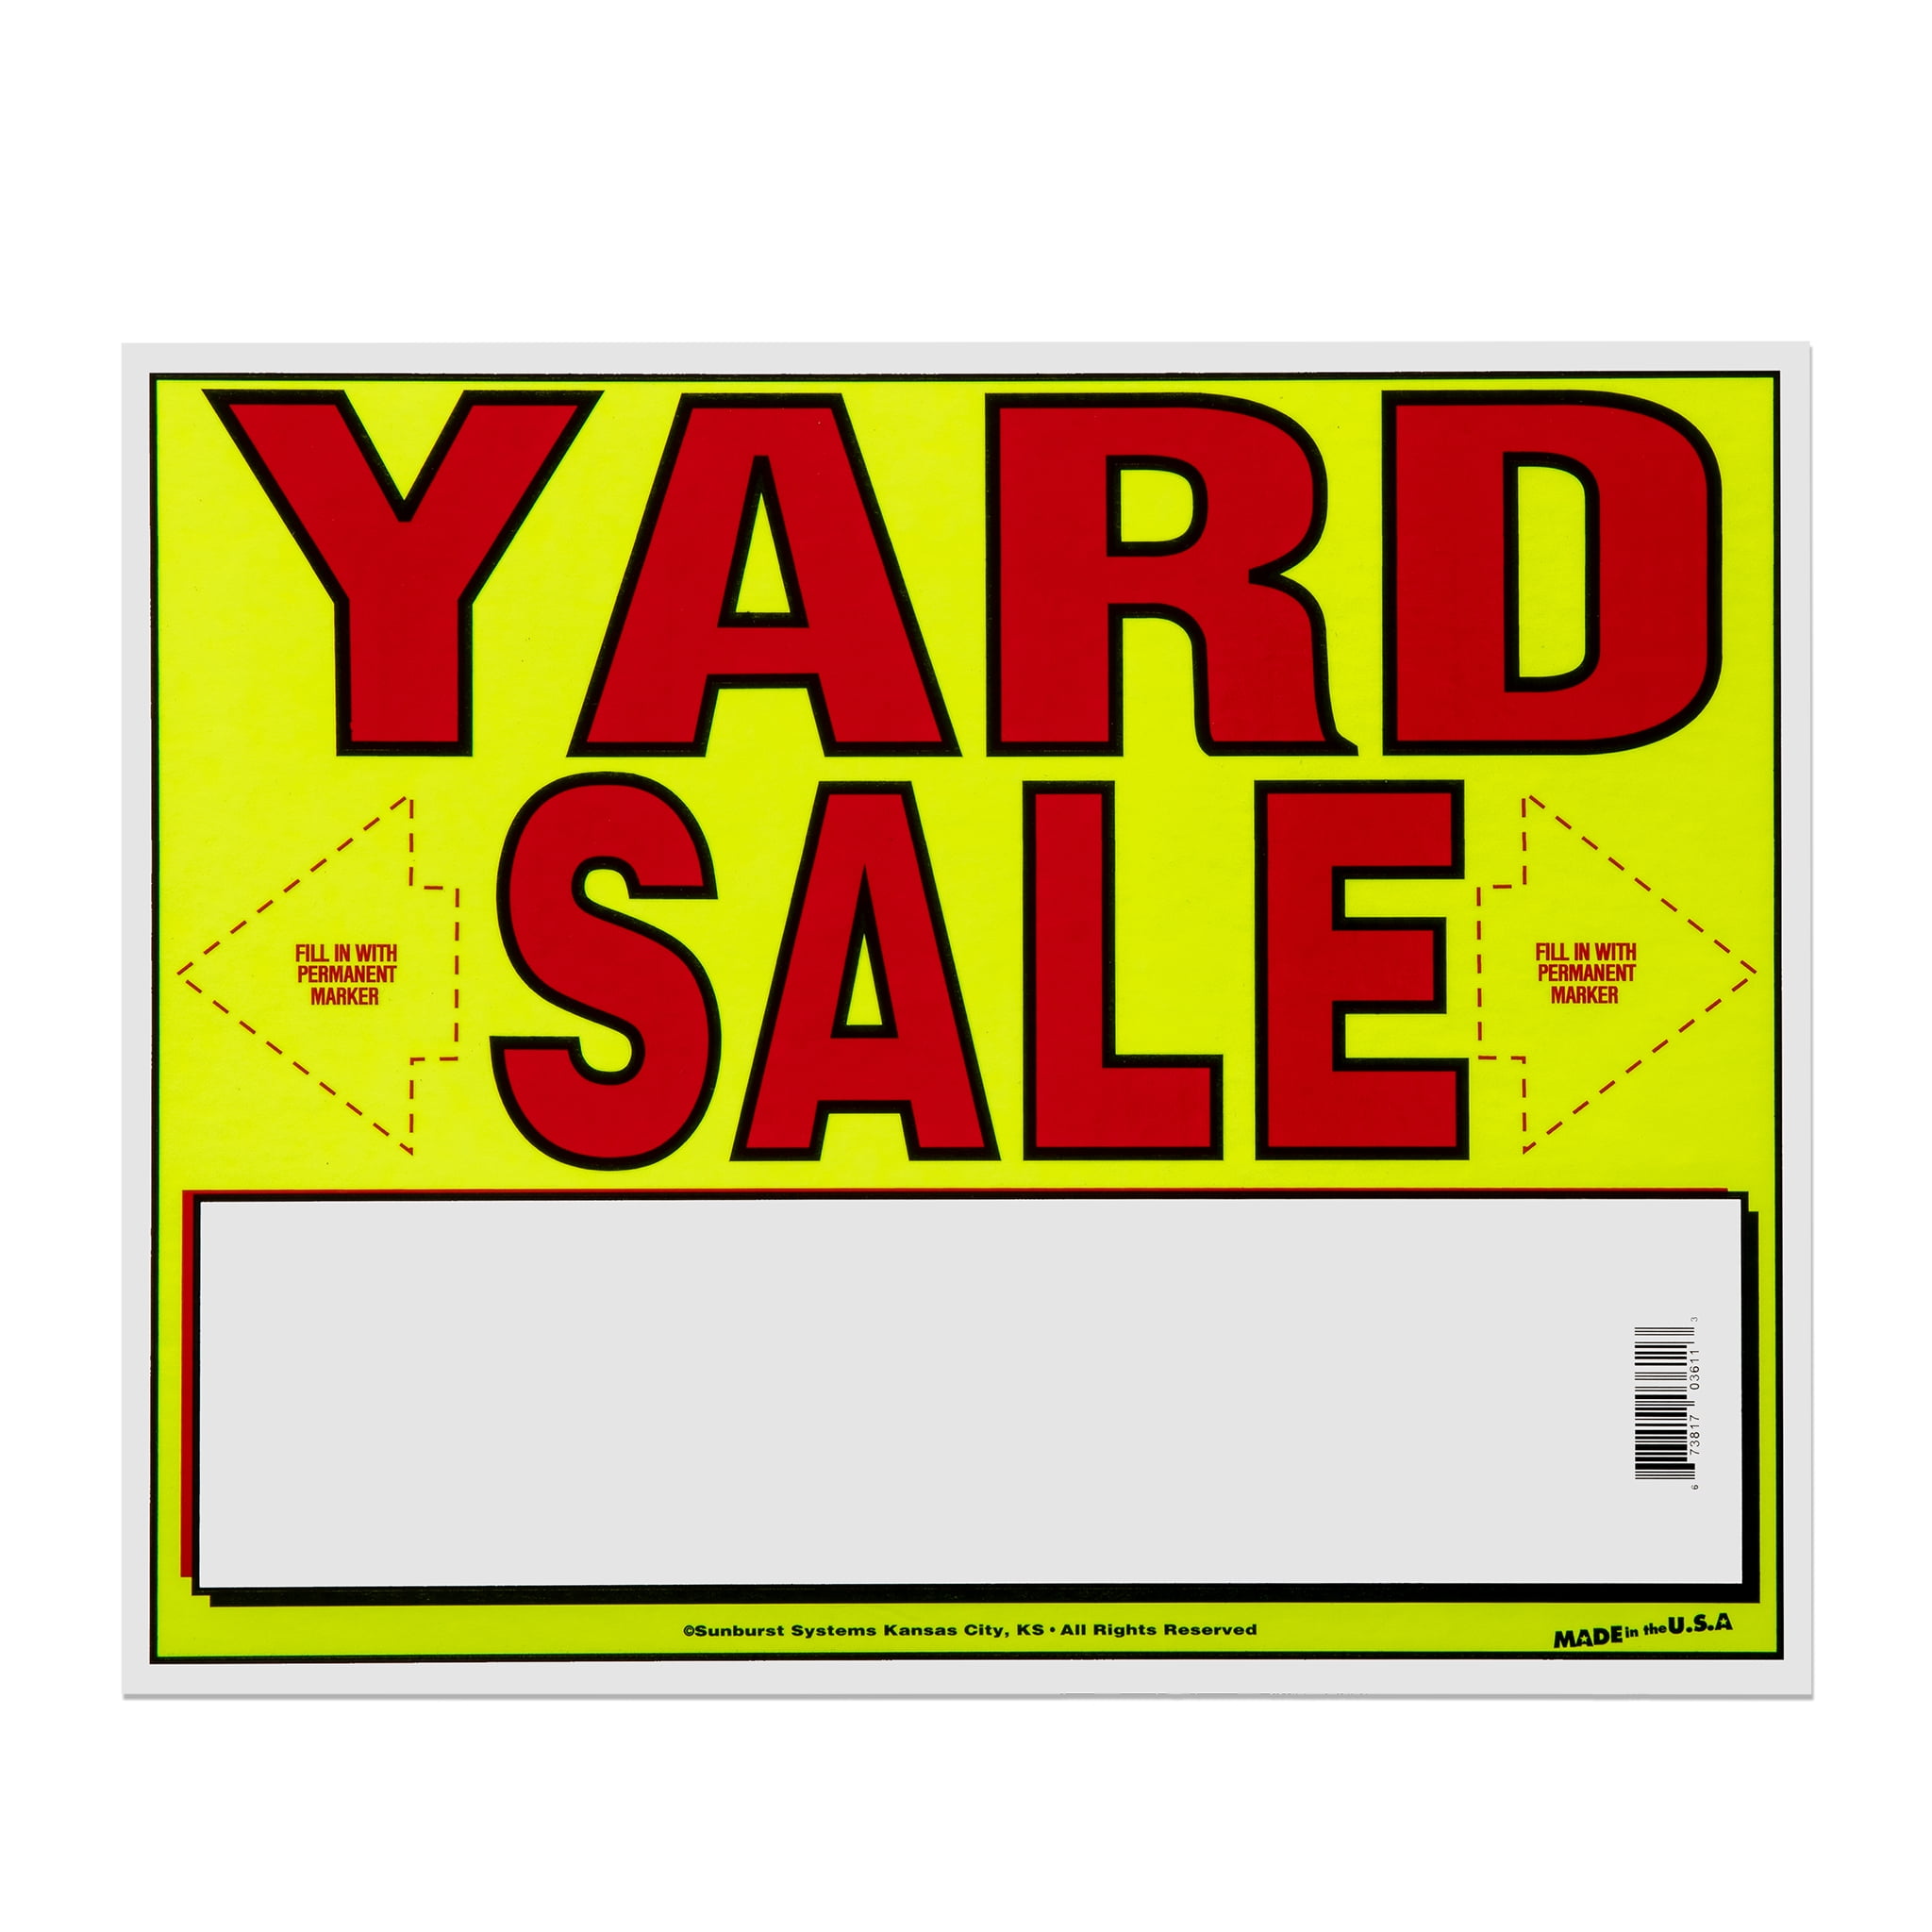 Sunburst Systems 3611 Yard Sale Sign, Yellow, Black and Red,11" x 14"